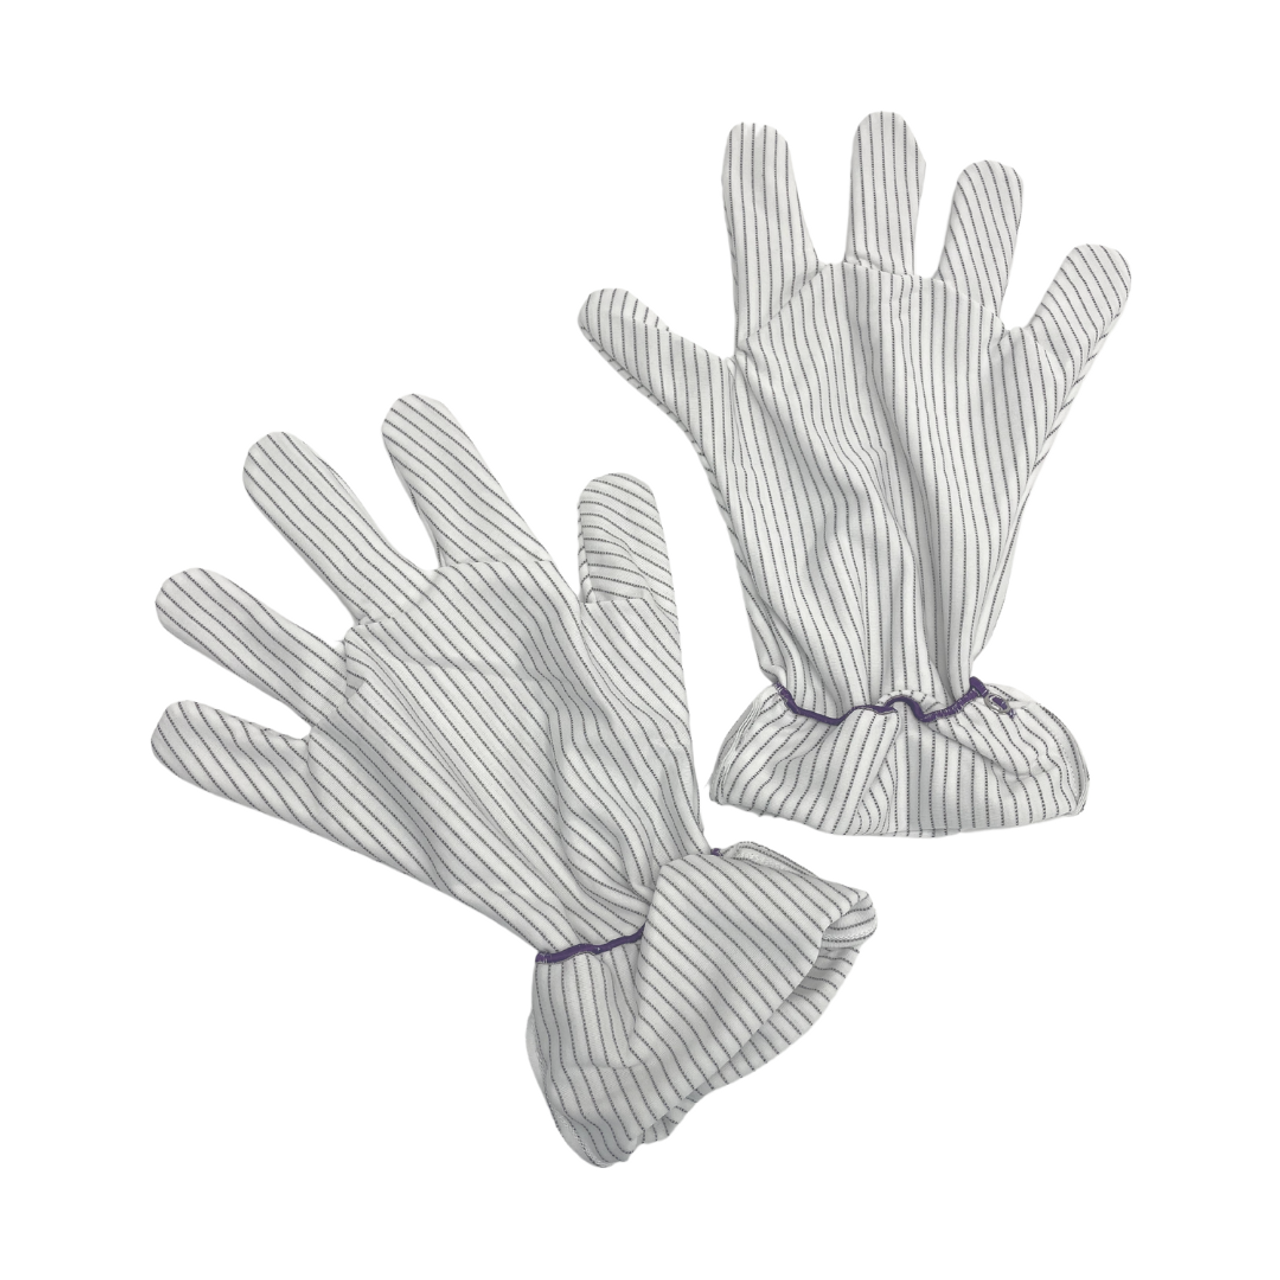 GL2500 - ESD Level 3 Cut Resistant Gloves - Uncoated - ESD